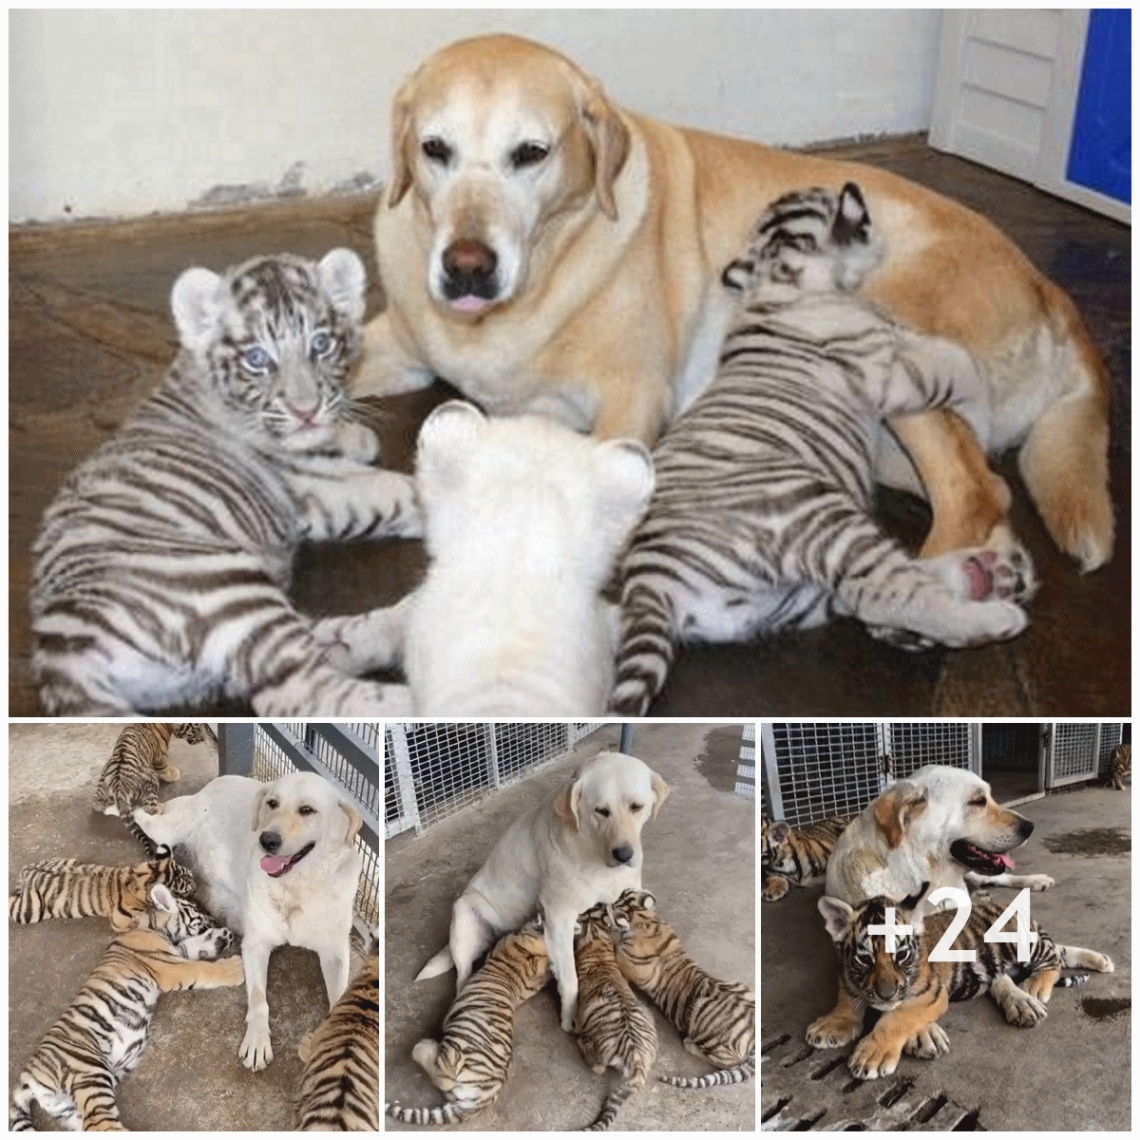 Motherly love transcends species differences: Mother dogs raise tiger cubs like their own children, living naturally in their own style.